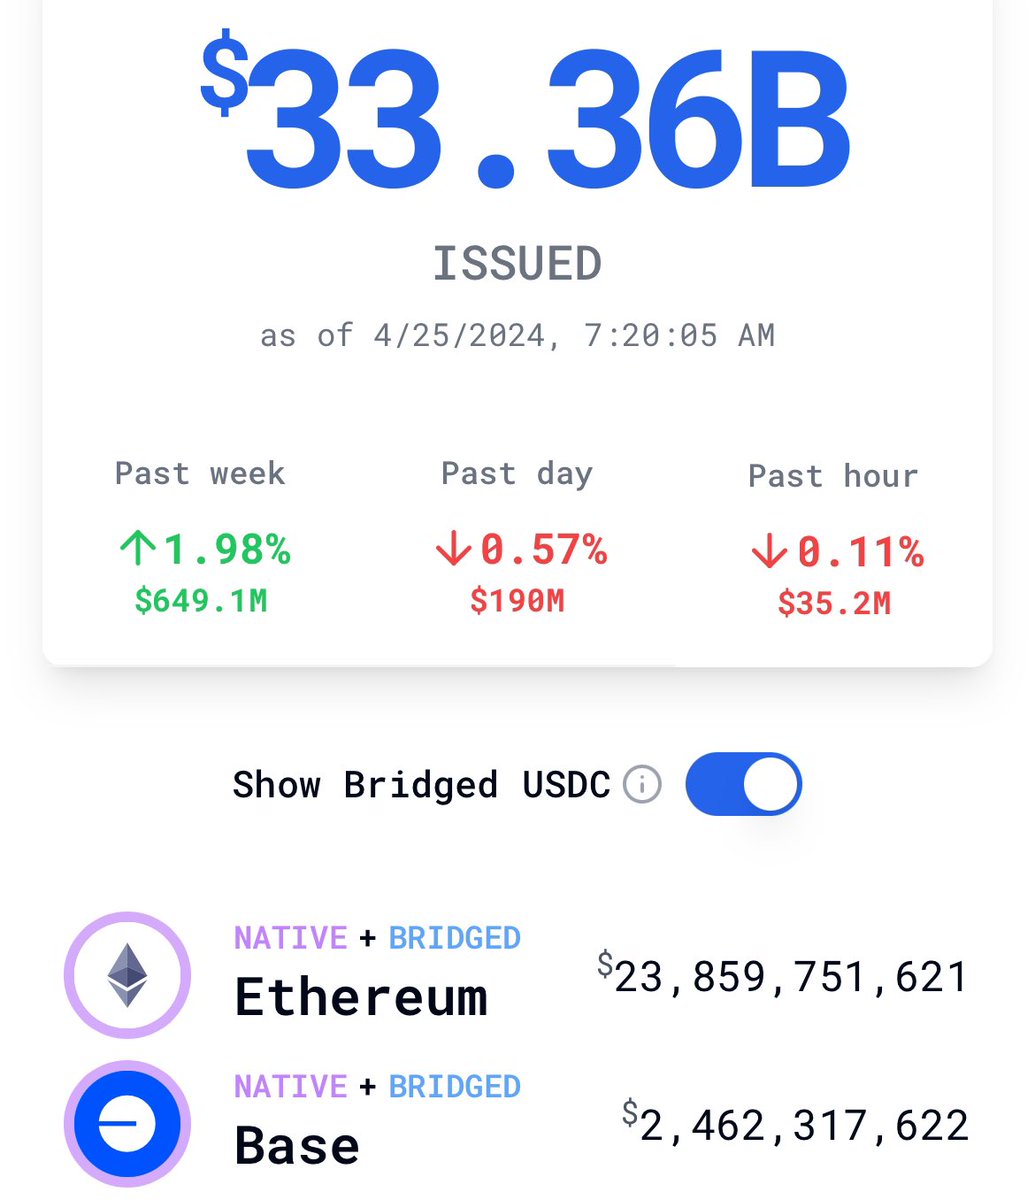 base now has the most USDC after Ethereum usdc.cool